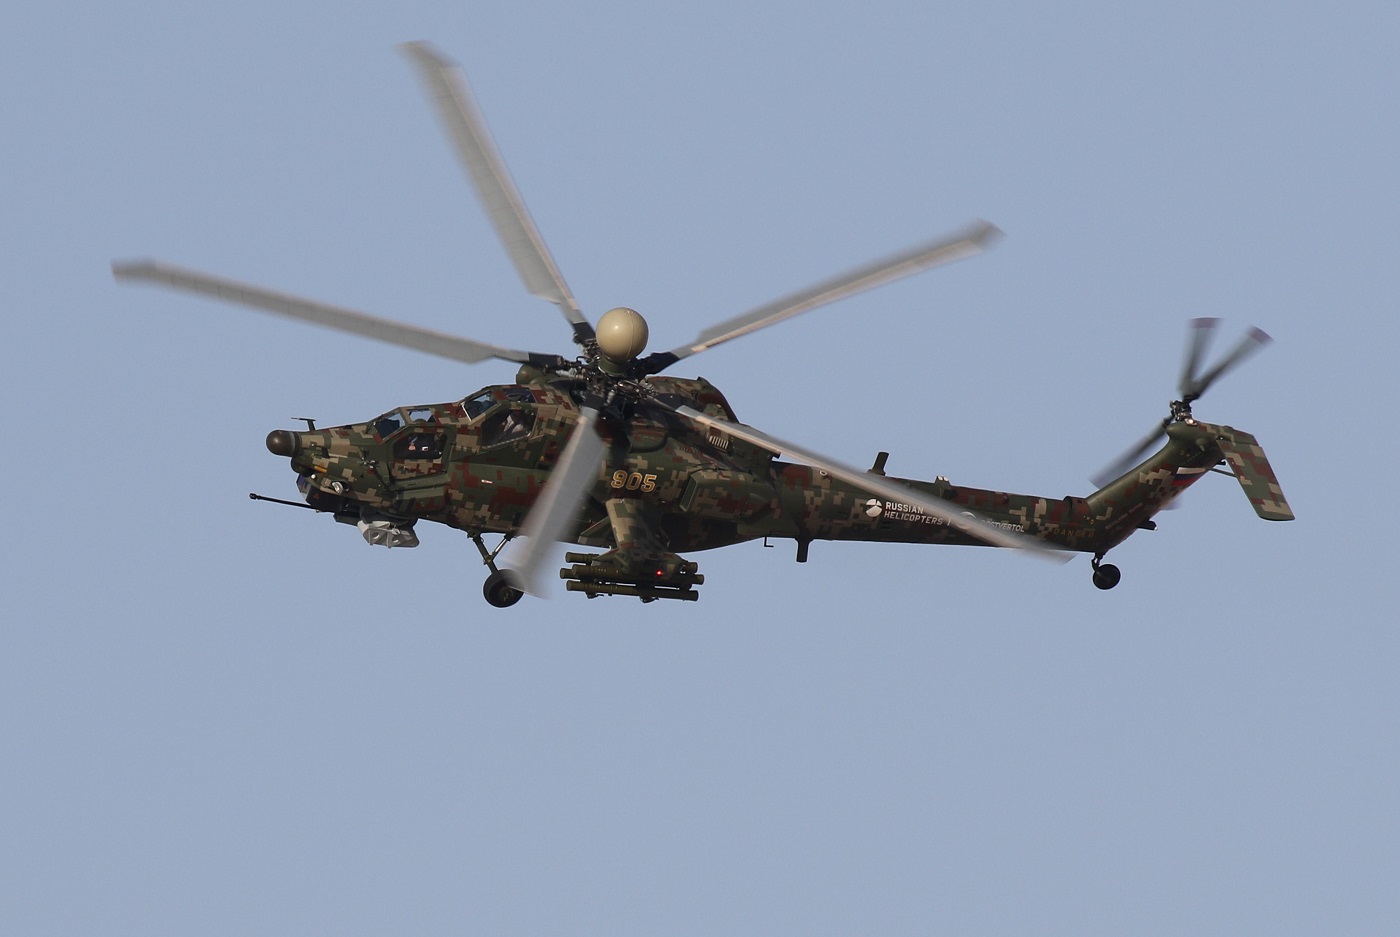 Mil Mi-28 Night Hunter Attack Helicopter Made Its First Demonstration Flight at Dubai Airshow